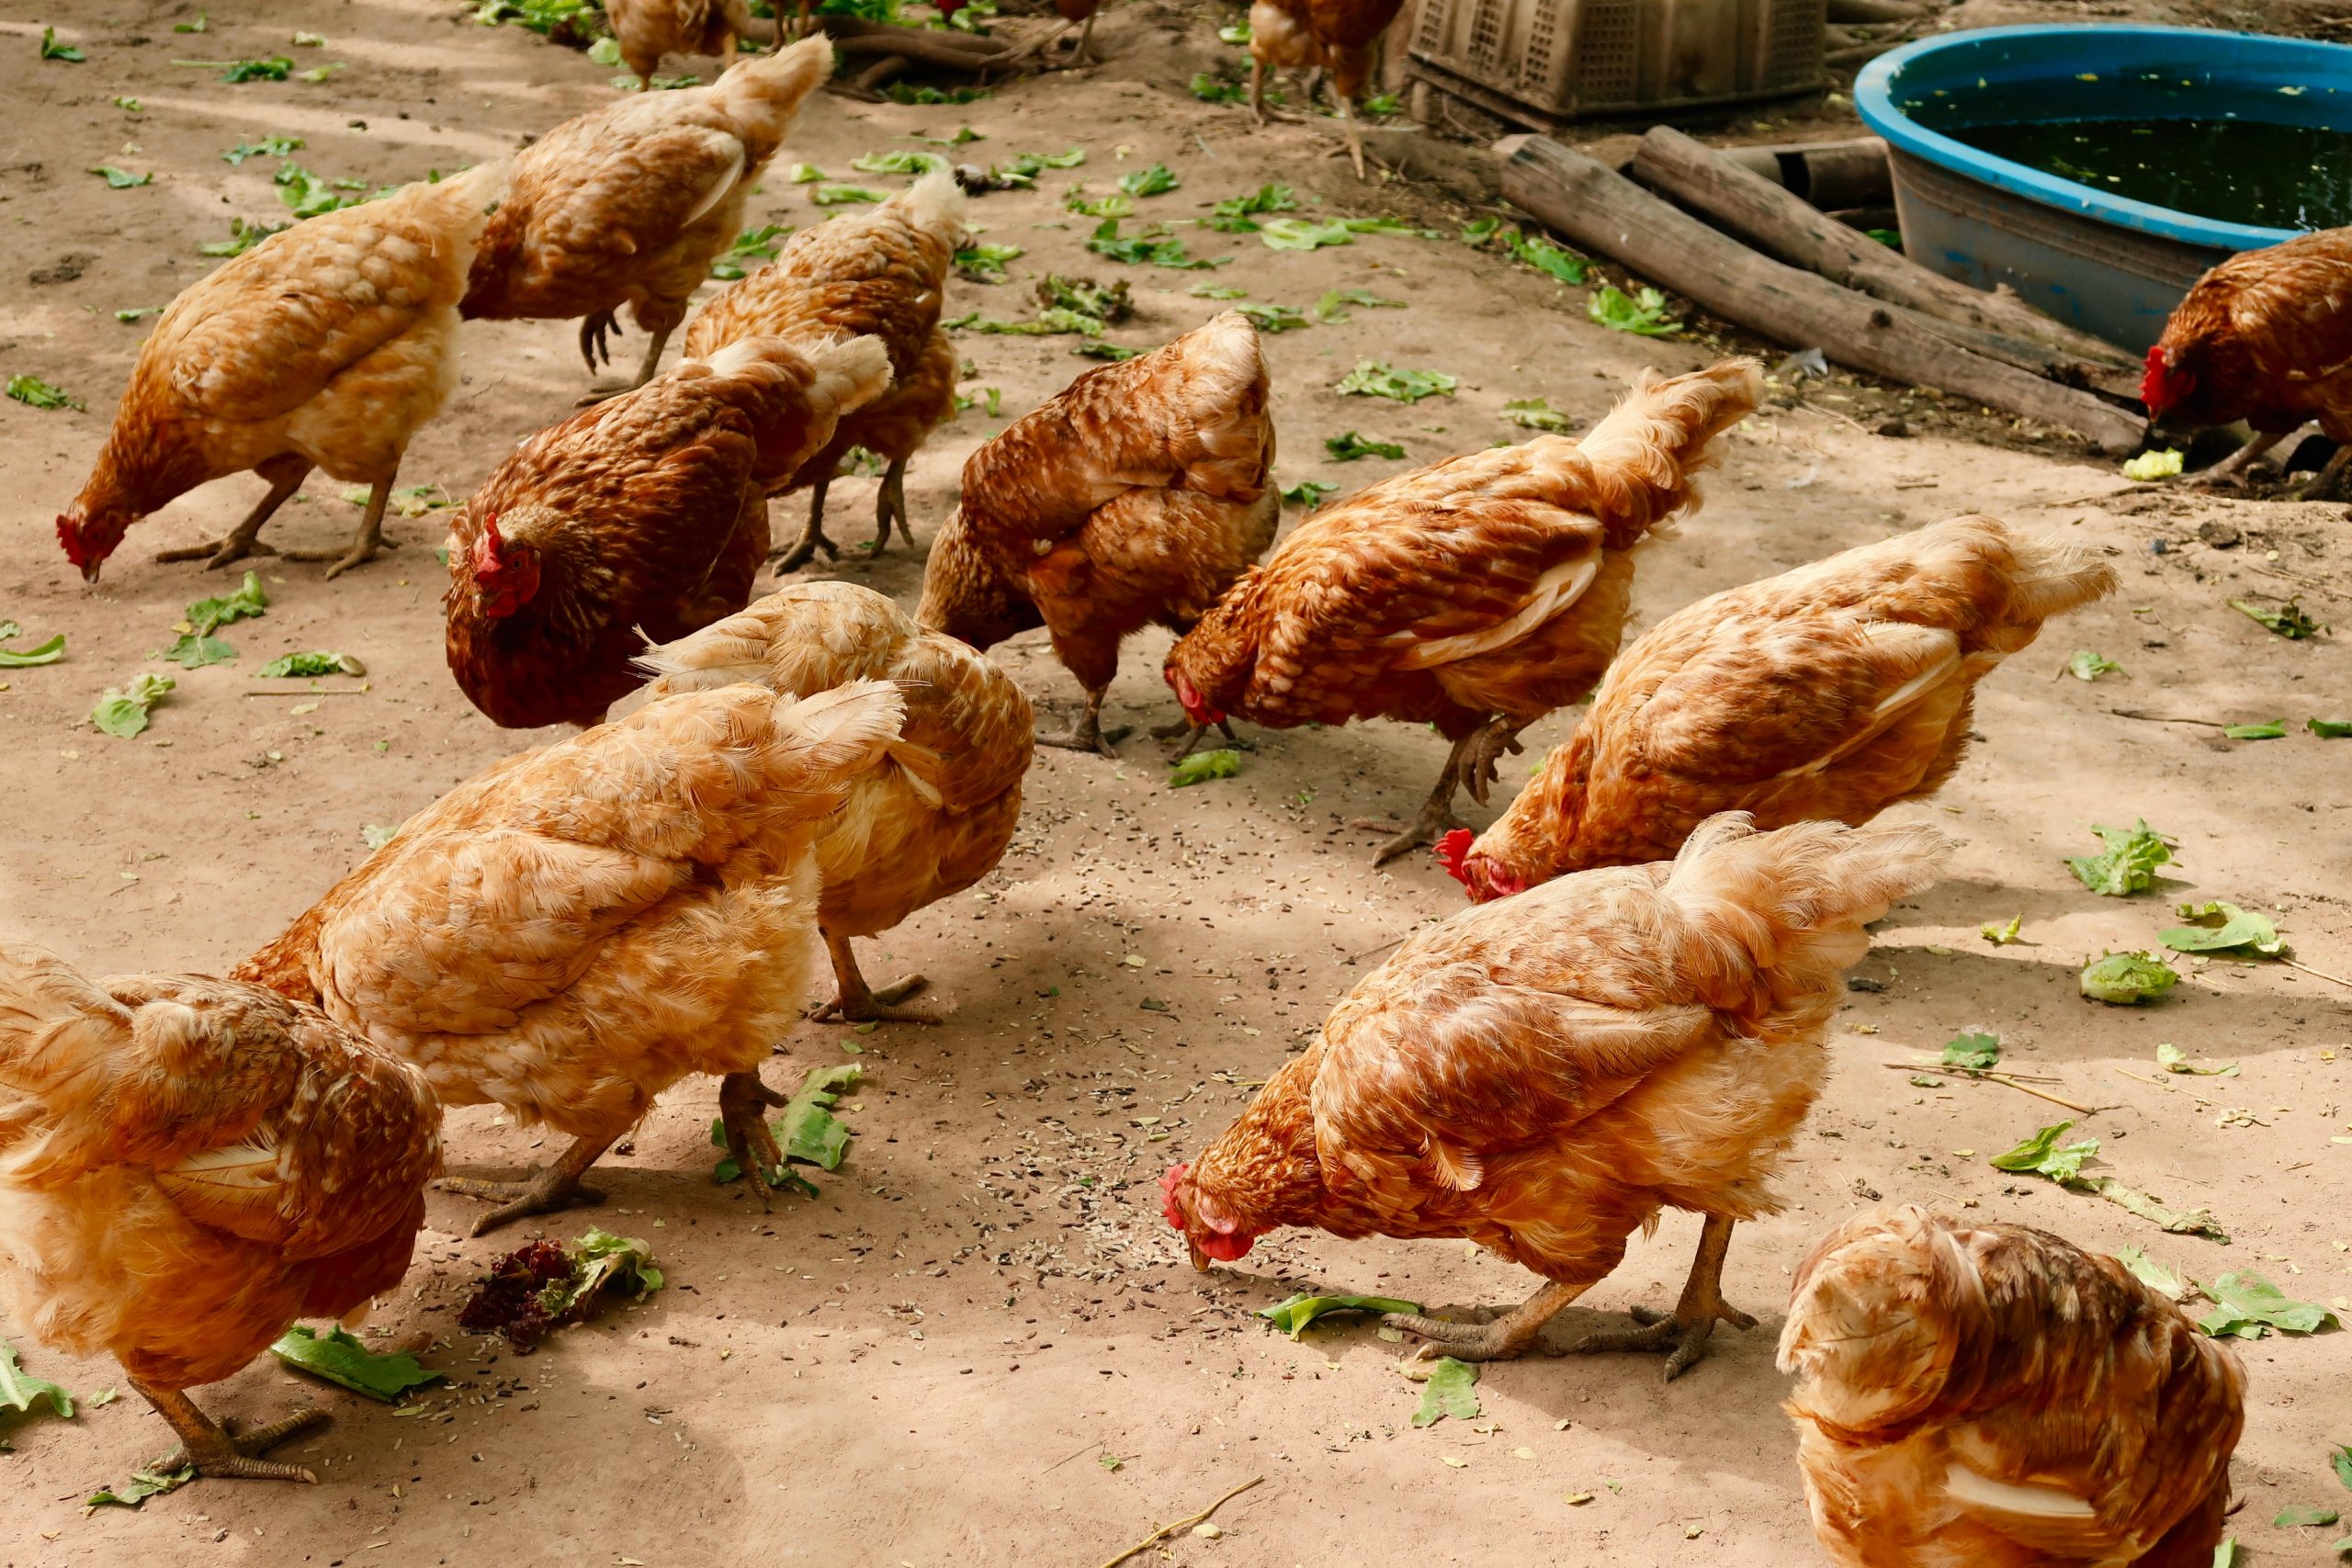 Chickens in a Thai farming community have been fed a diet of cannabis. Image credit: chatnarin pramnapan on Unsplash